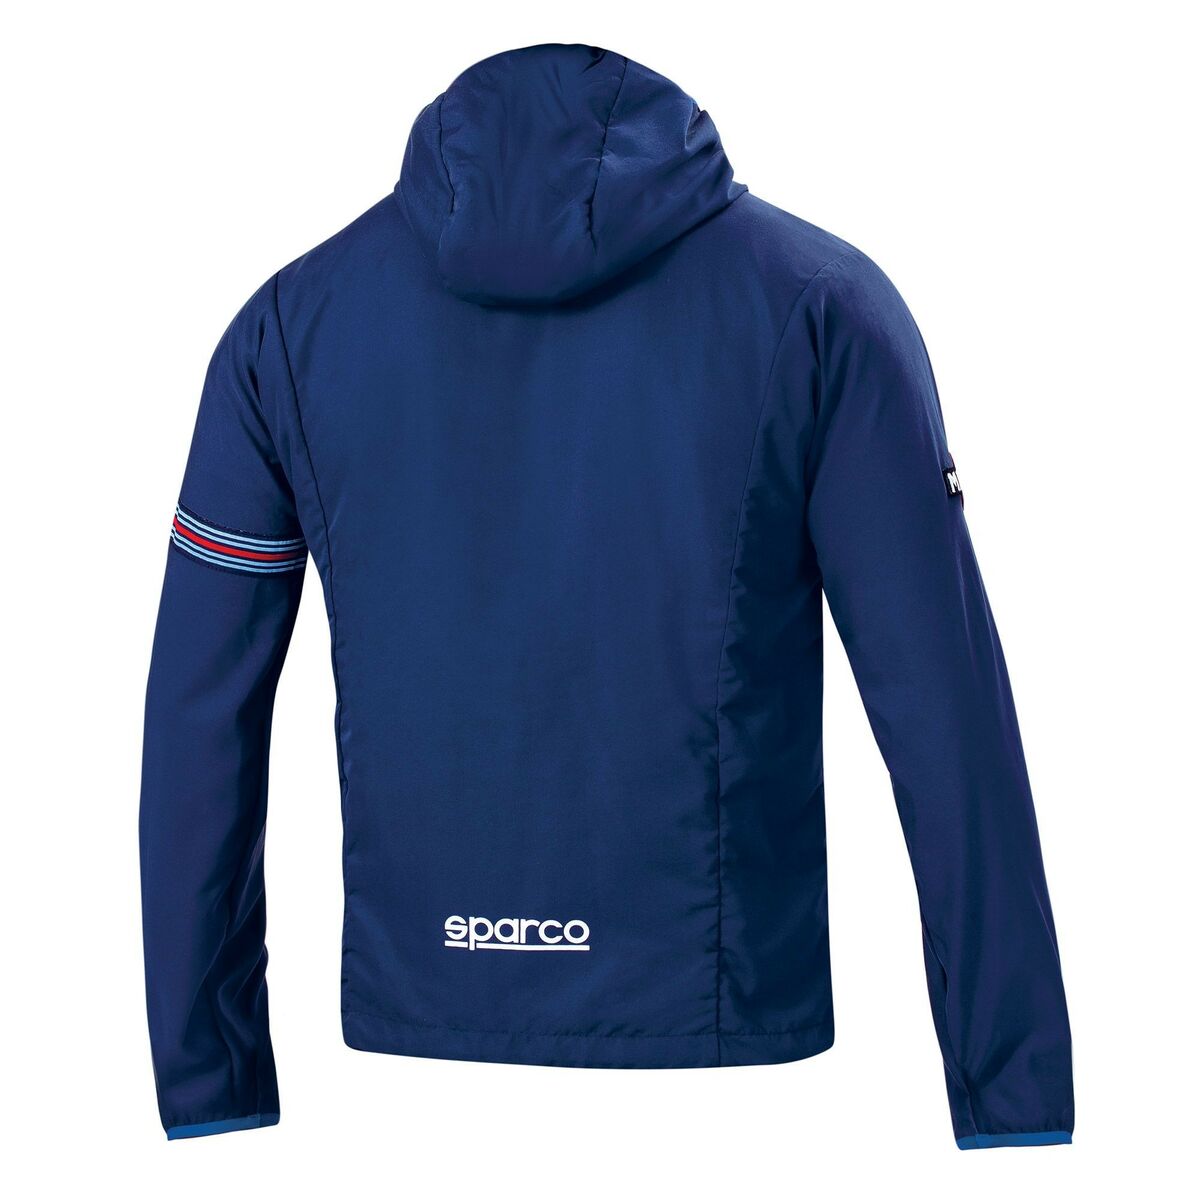 Windcheater Jacket Sparco Martini Racing Blue M